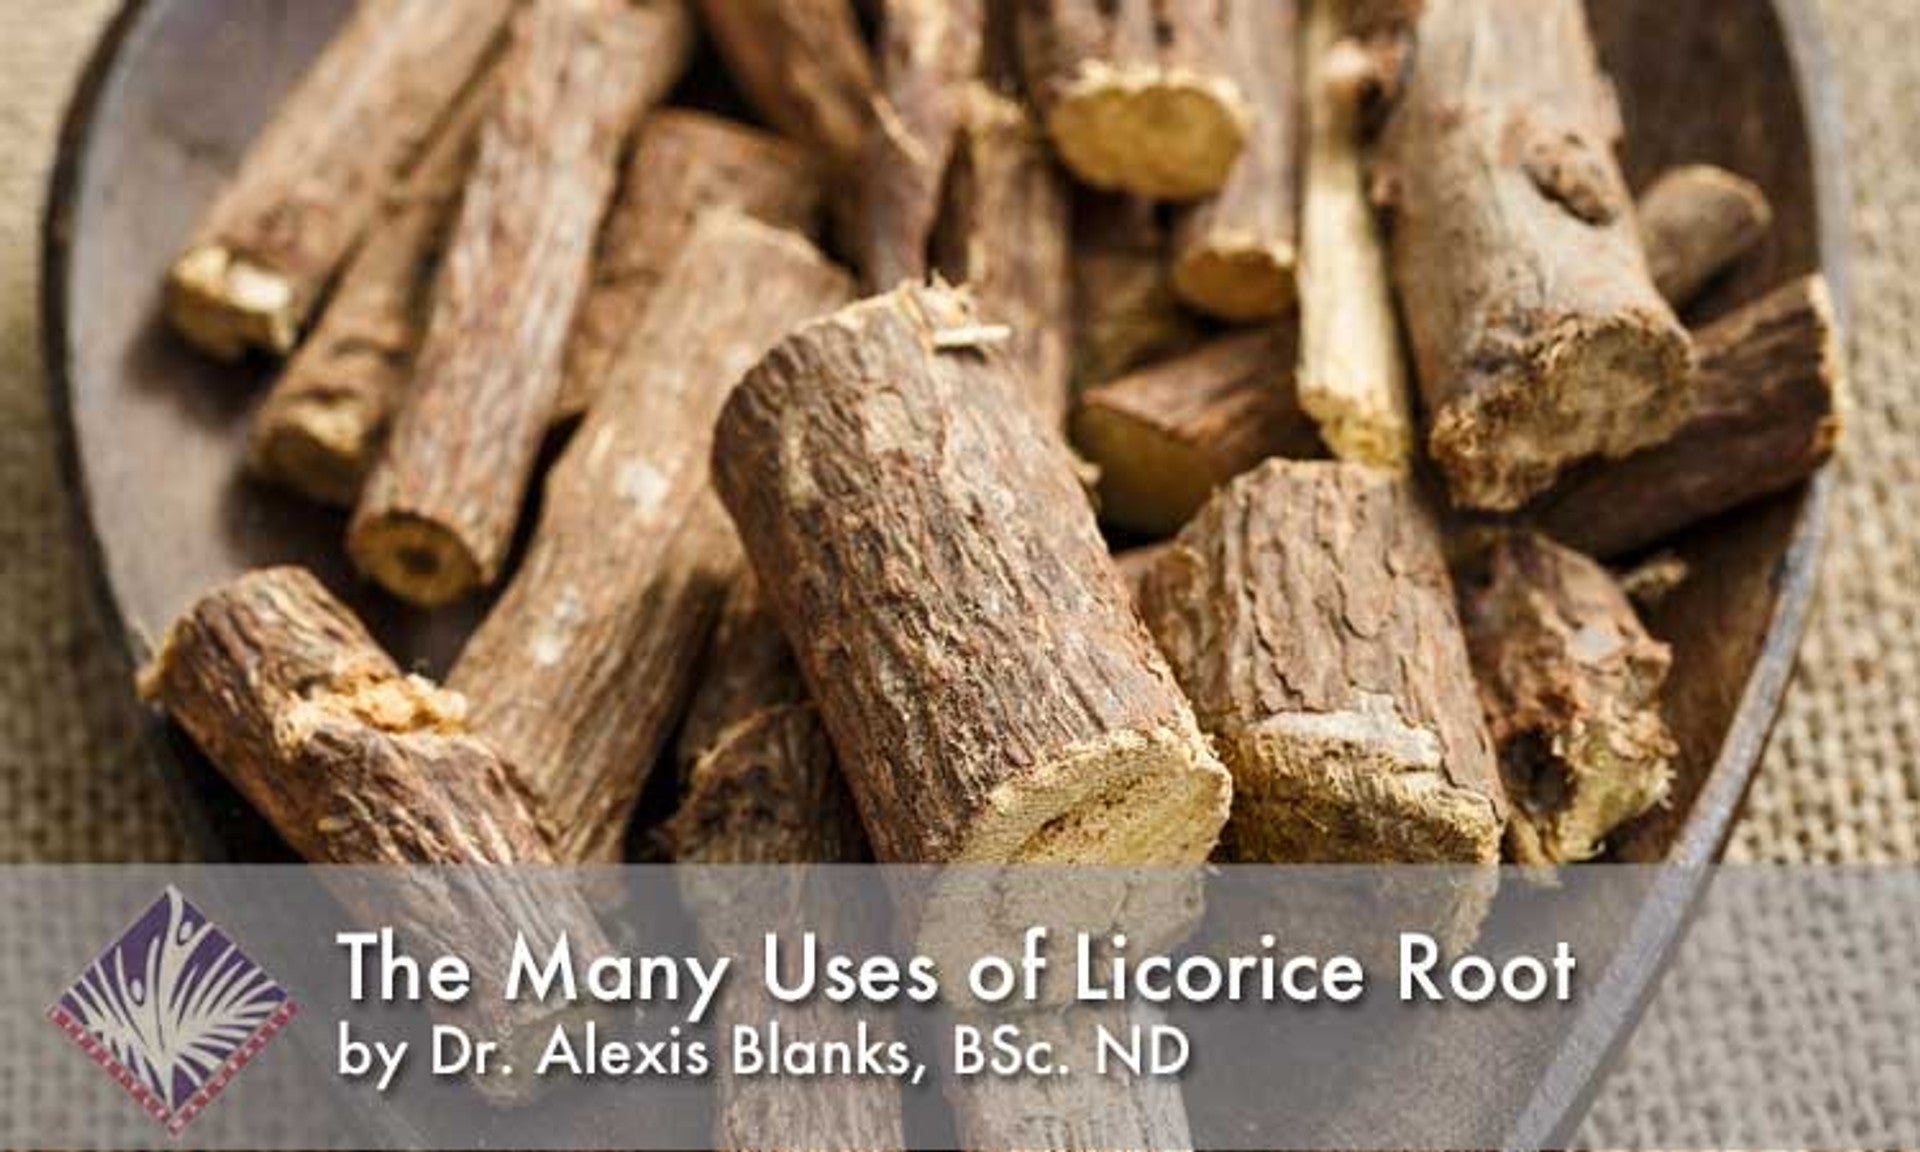 The Many Uses of Licorice Root